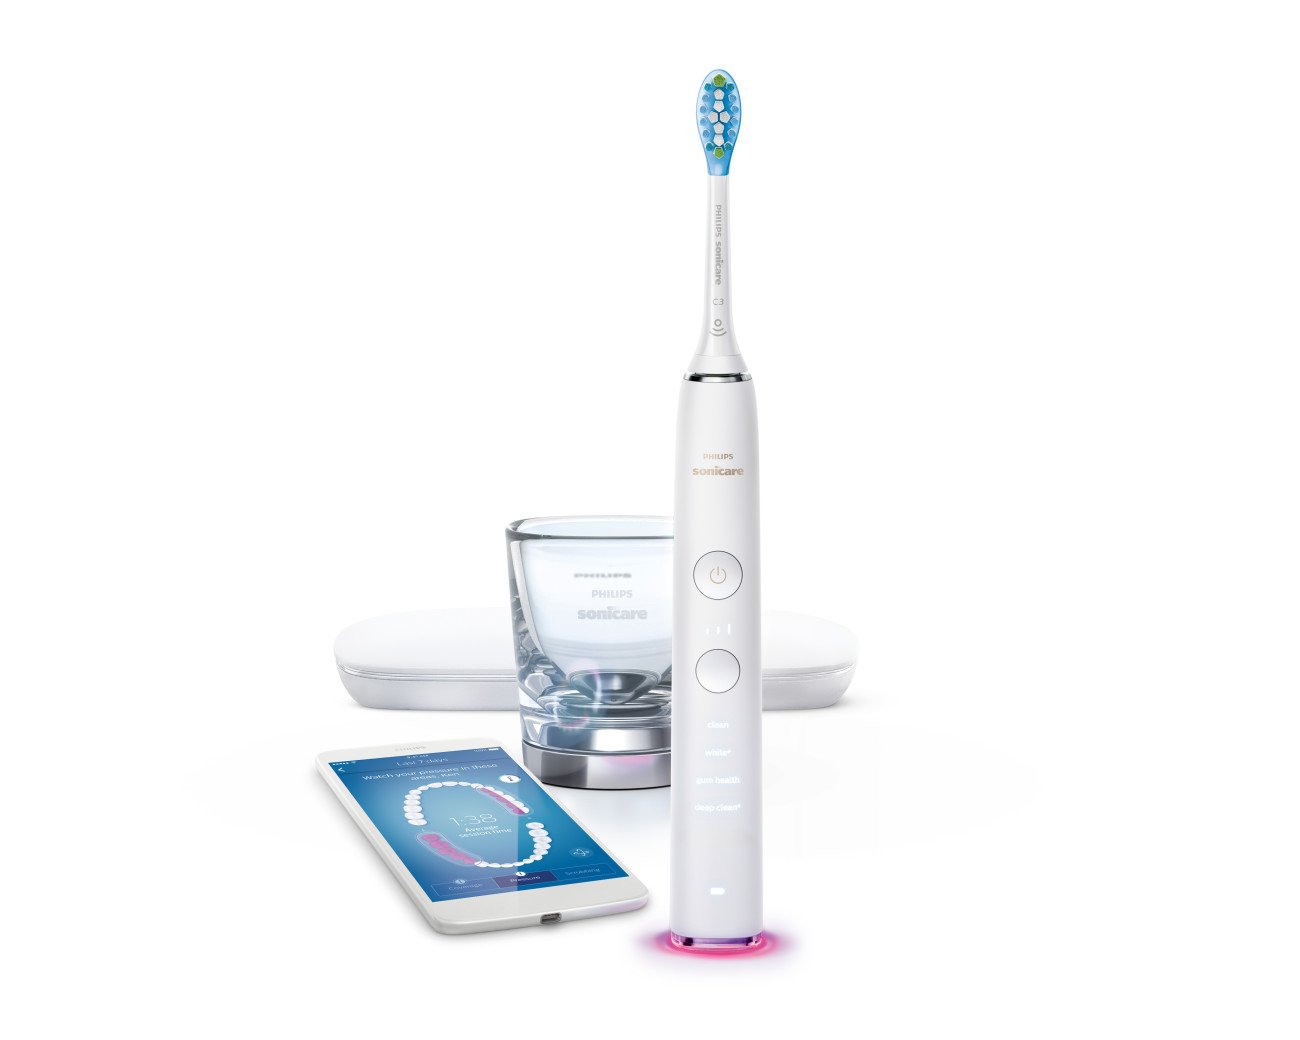 Philips Sonicare Diamond Clean Smart Electric Rechargeable Toothbrush for Complete Oral Care, 9300 Series - HX9903/30, White, 2.31 Pound